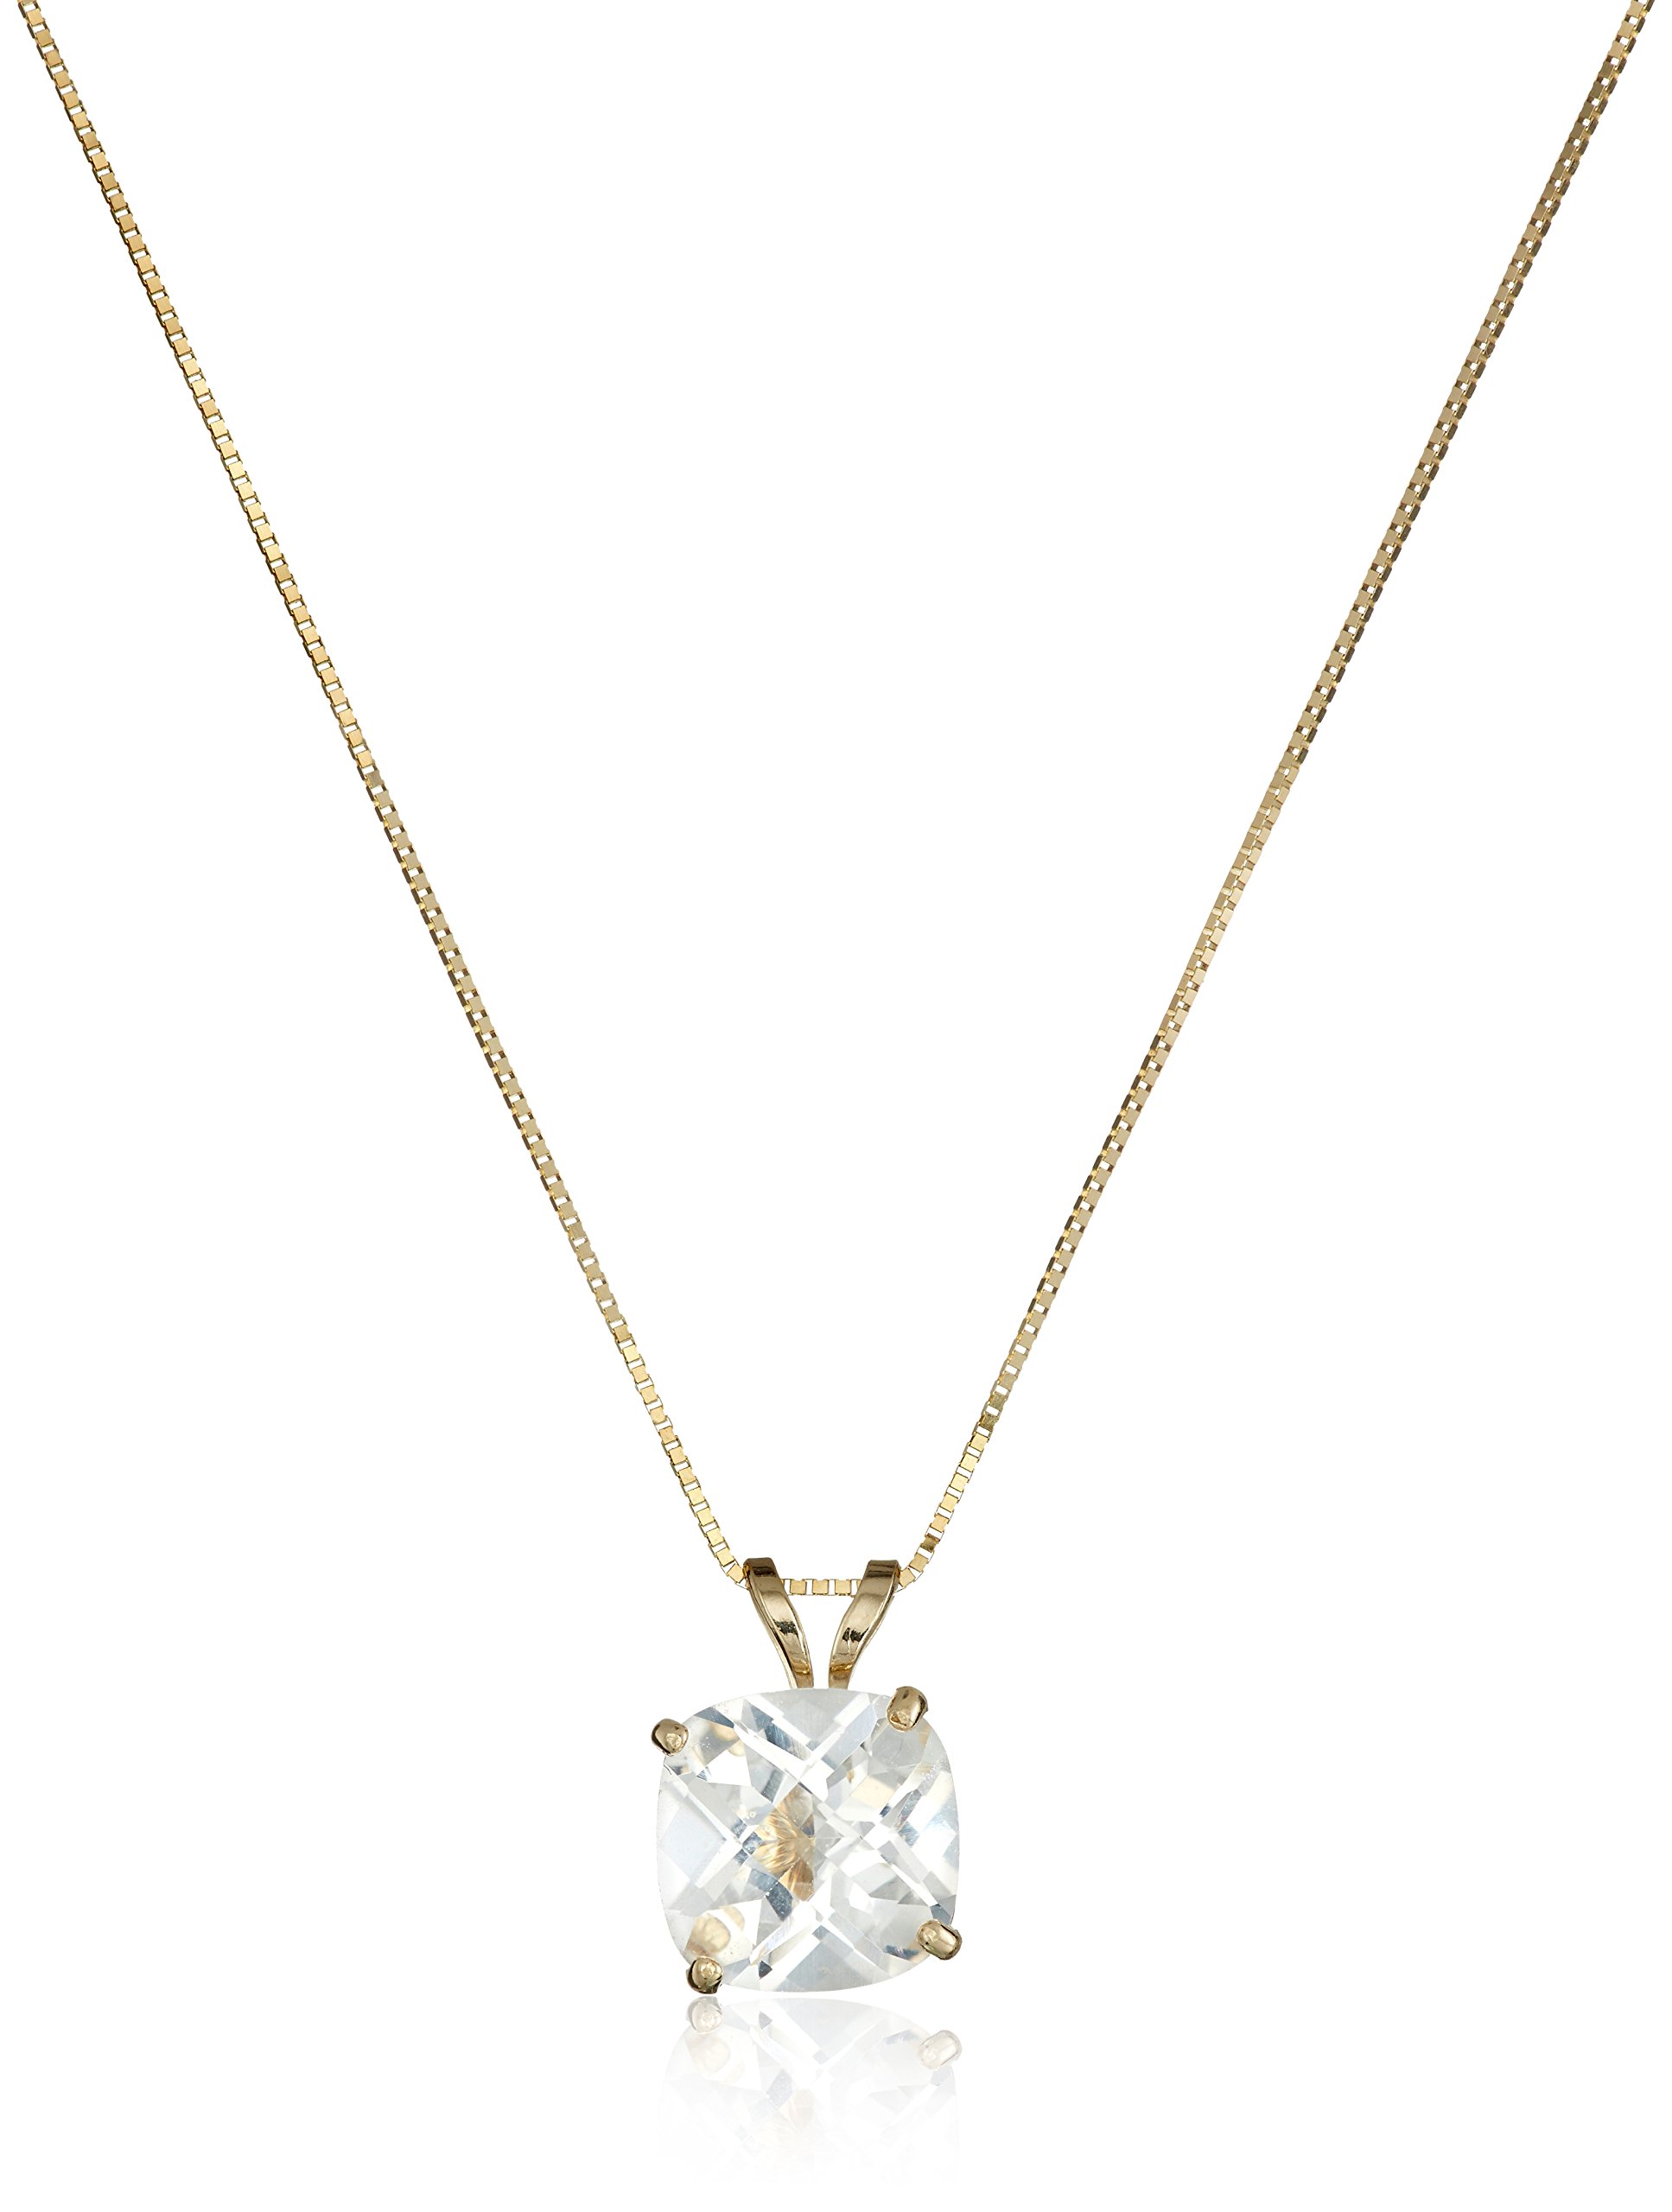 Amazon Collection 14k Gold 8mm Gemstone Pendant Necklace for Women with 18 Inch Box Chain